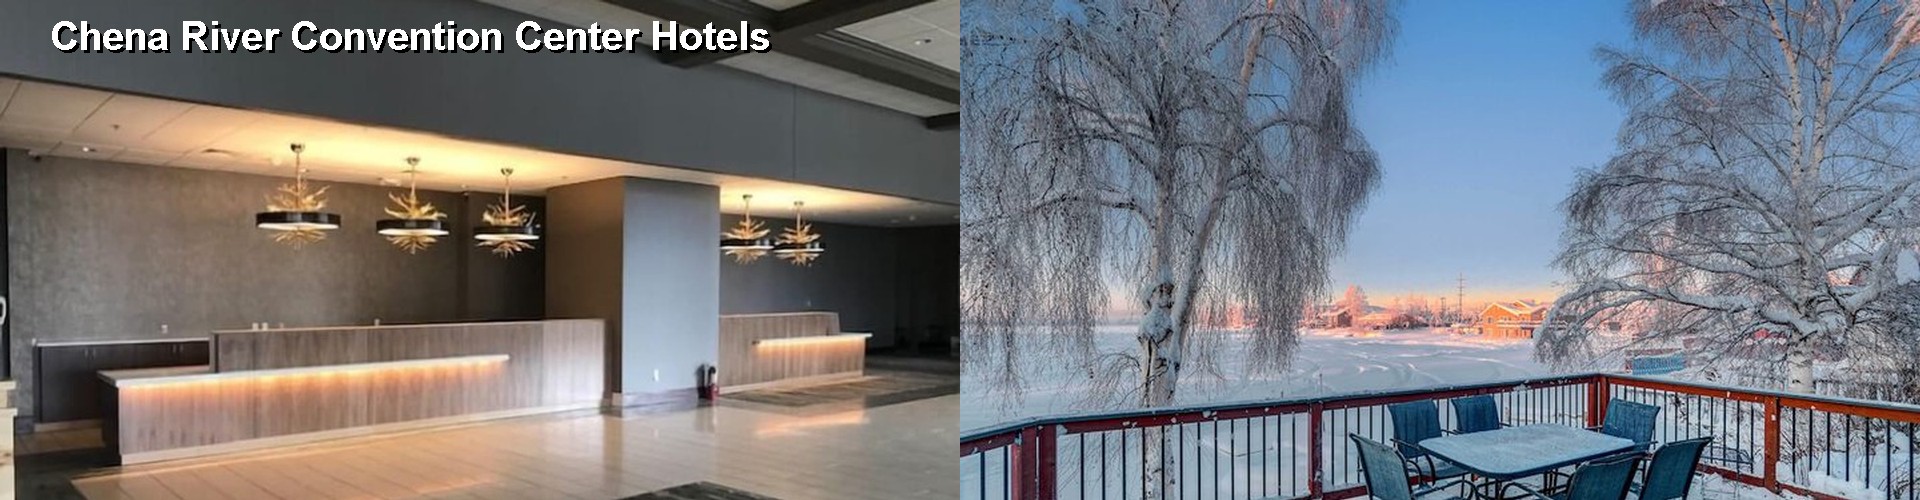 5 Best Hotels near Chena River Convention Center